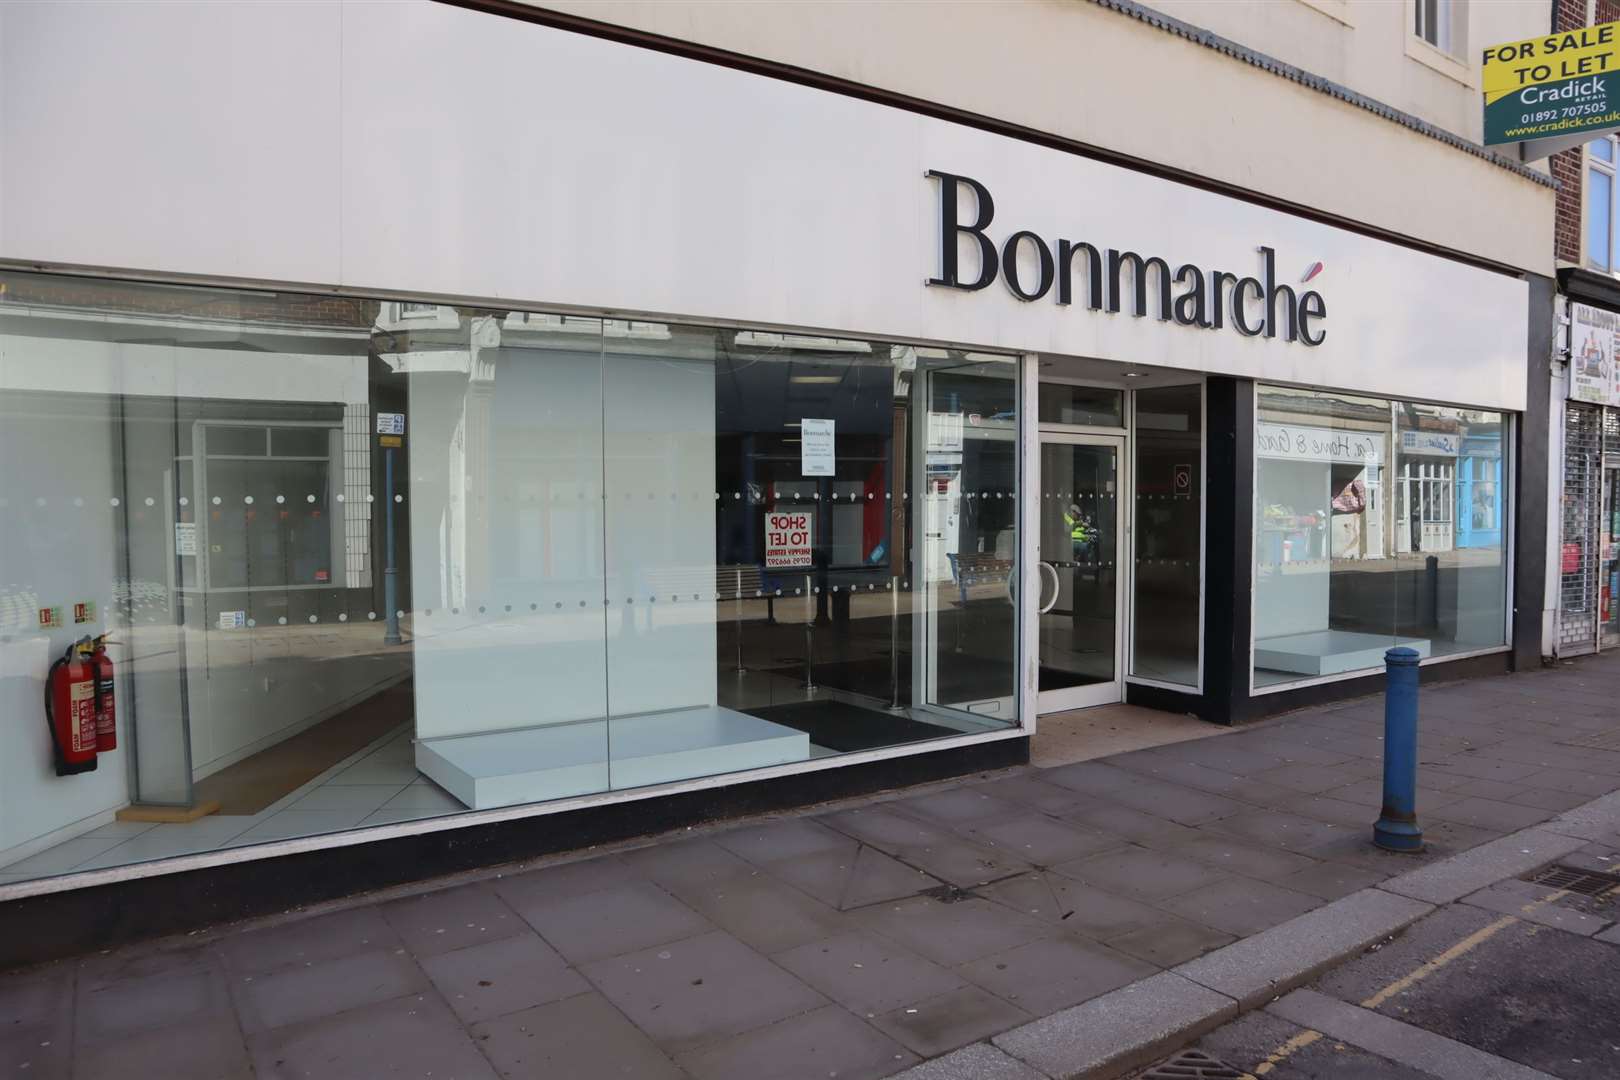 Bonmarche store in Sheerness high street has been stripped of its stock and closed permanently